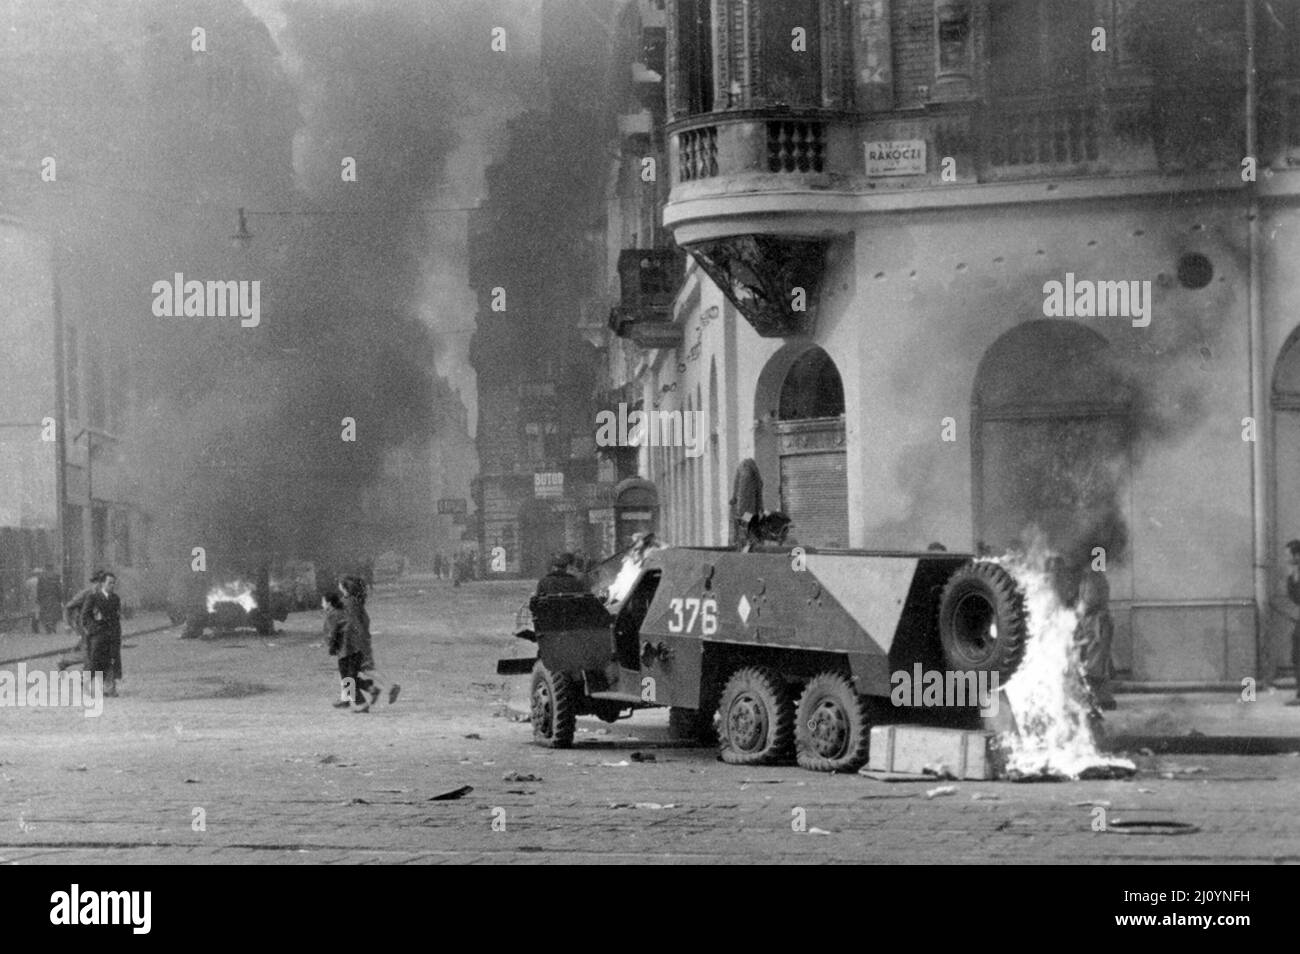 A Soviet-built BTR-152 armored personnel carrier burns on a Budapest street, November 1956  during the 1956 Hungarian Revolution. Stock Photo